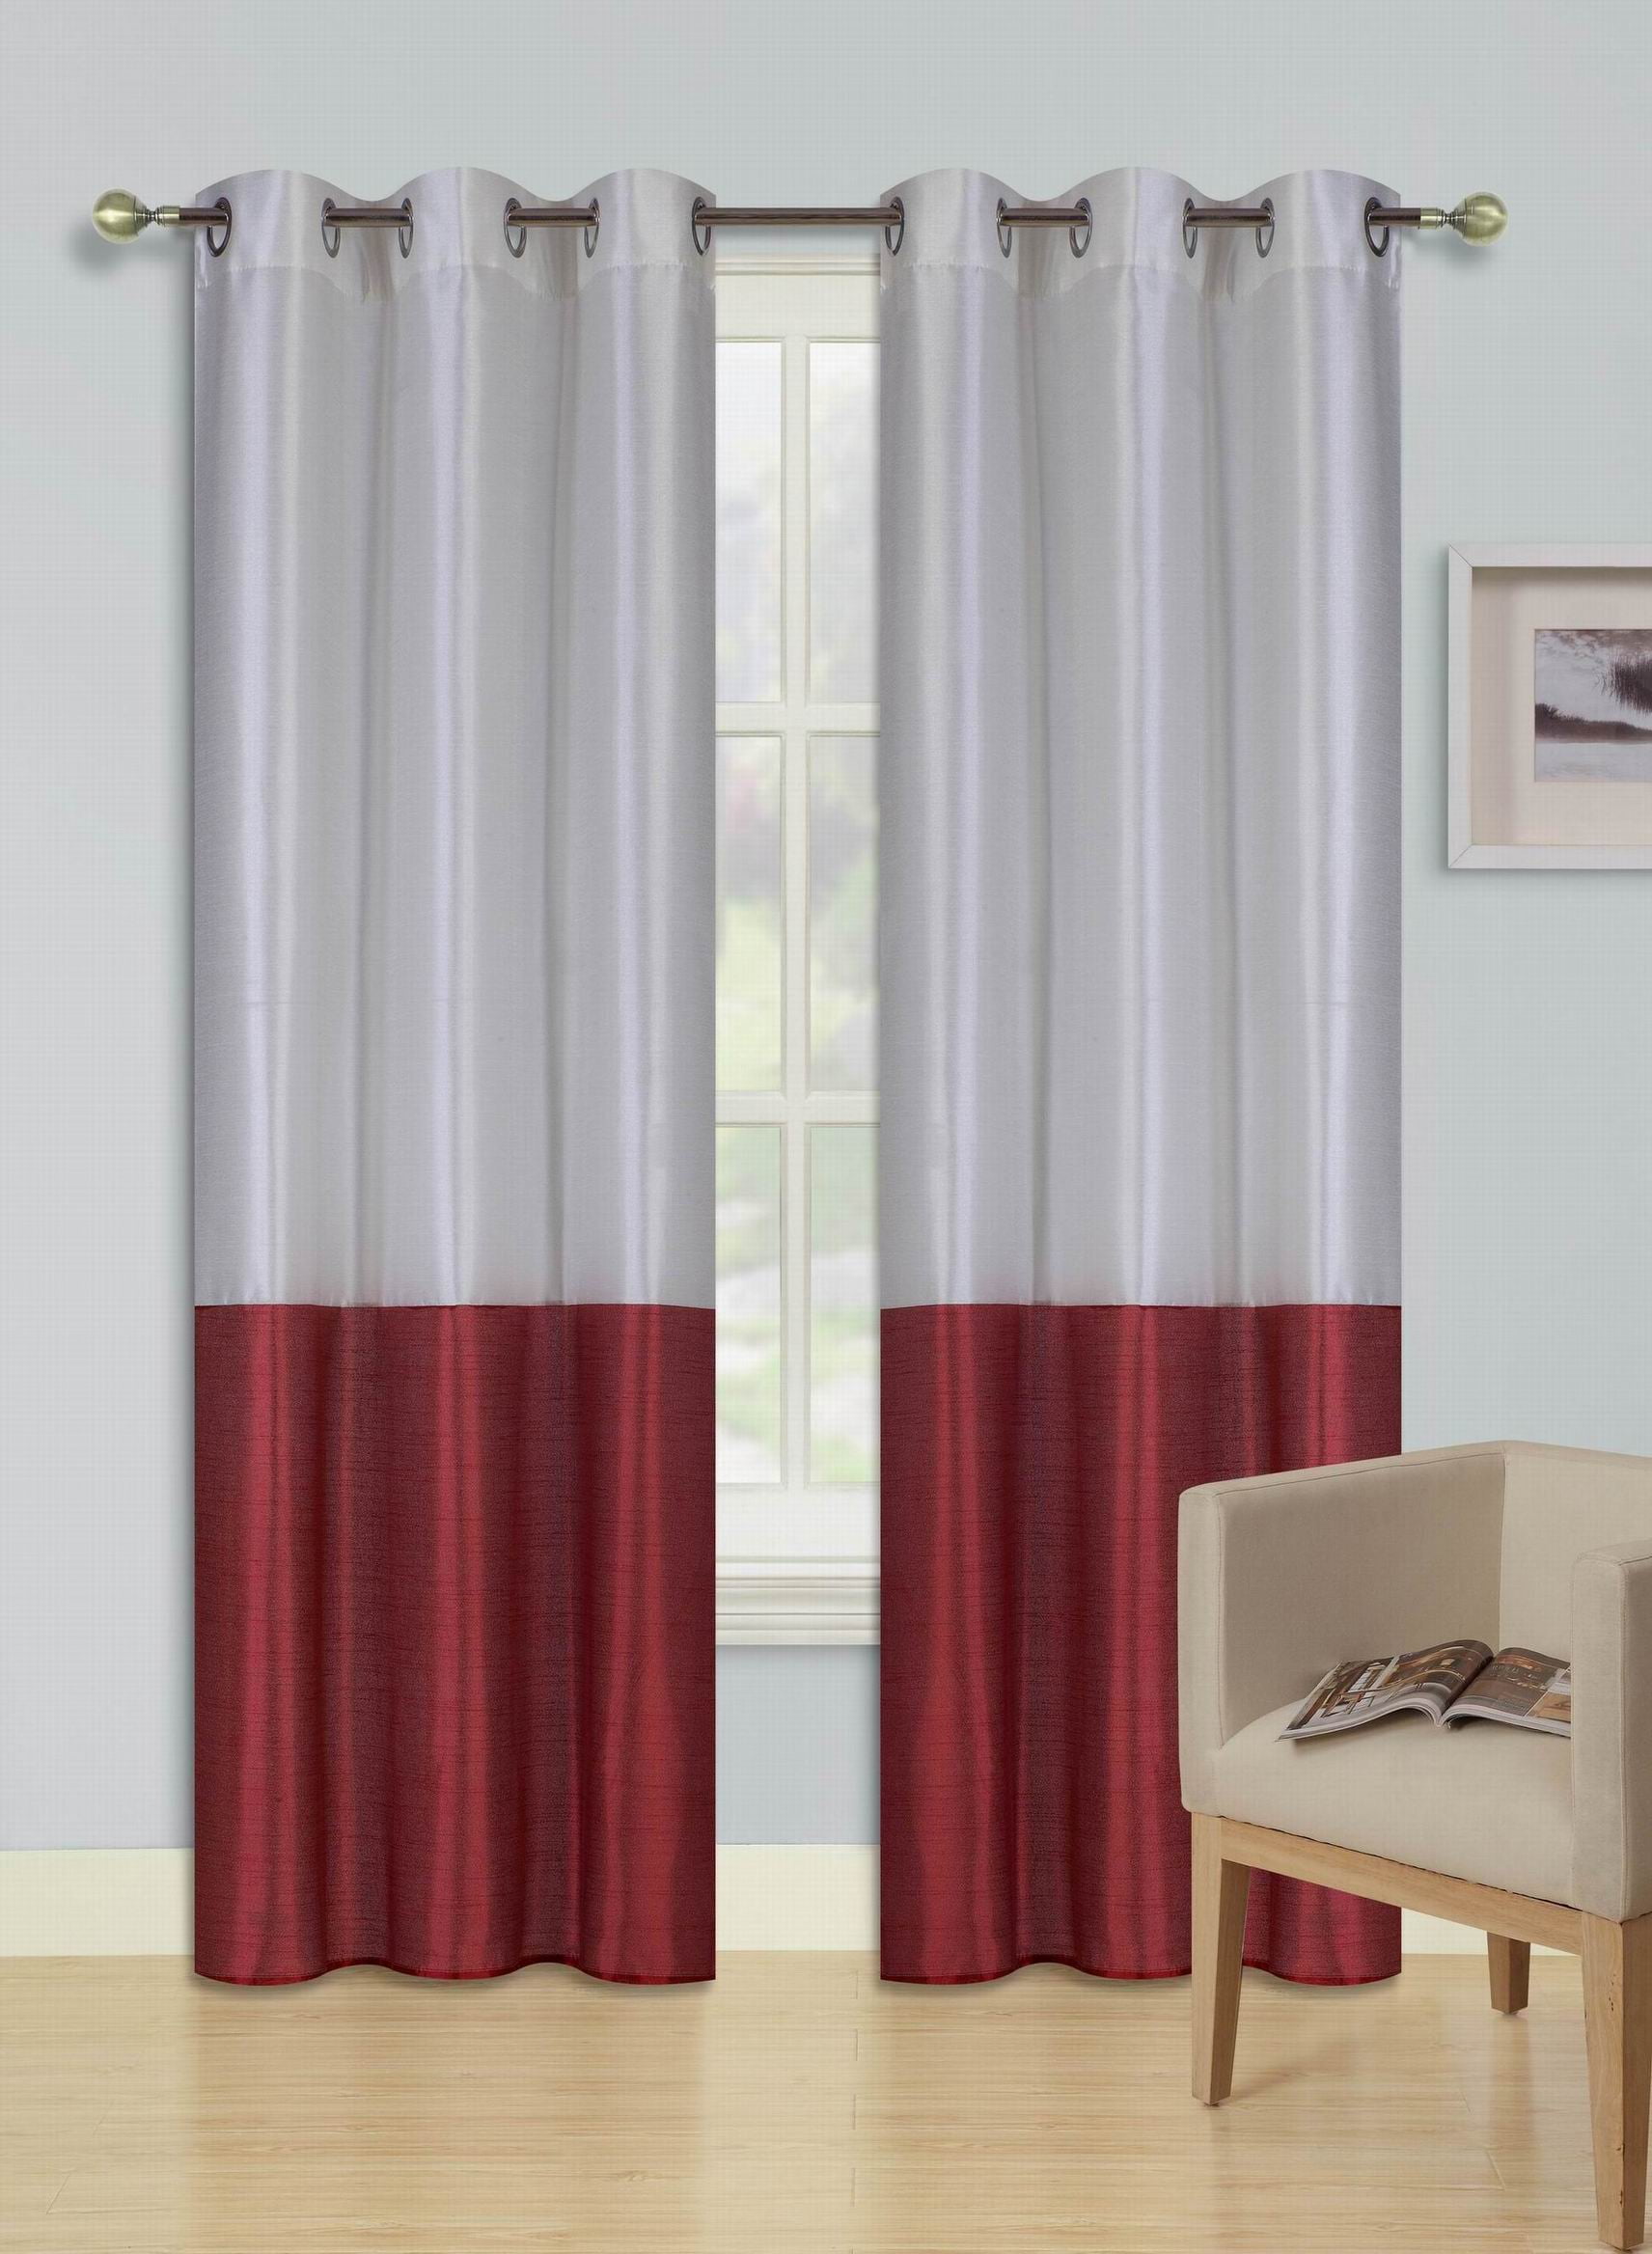 1PC New 2-TONE Window Curtain Grommet Panel Lined Blackout EID IVORY BROWN 